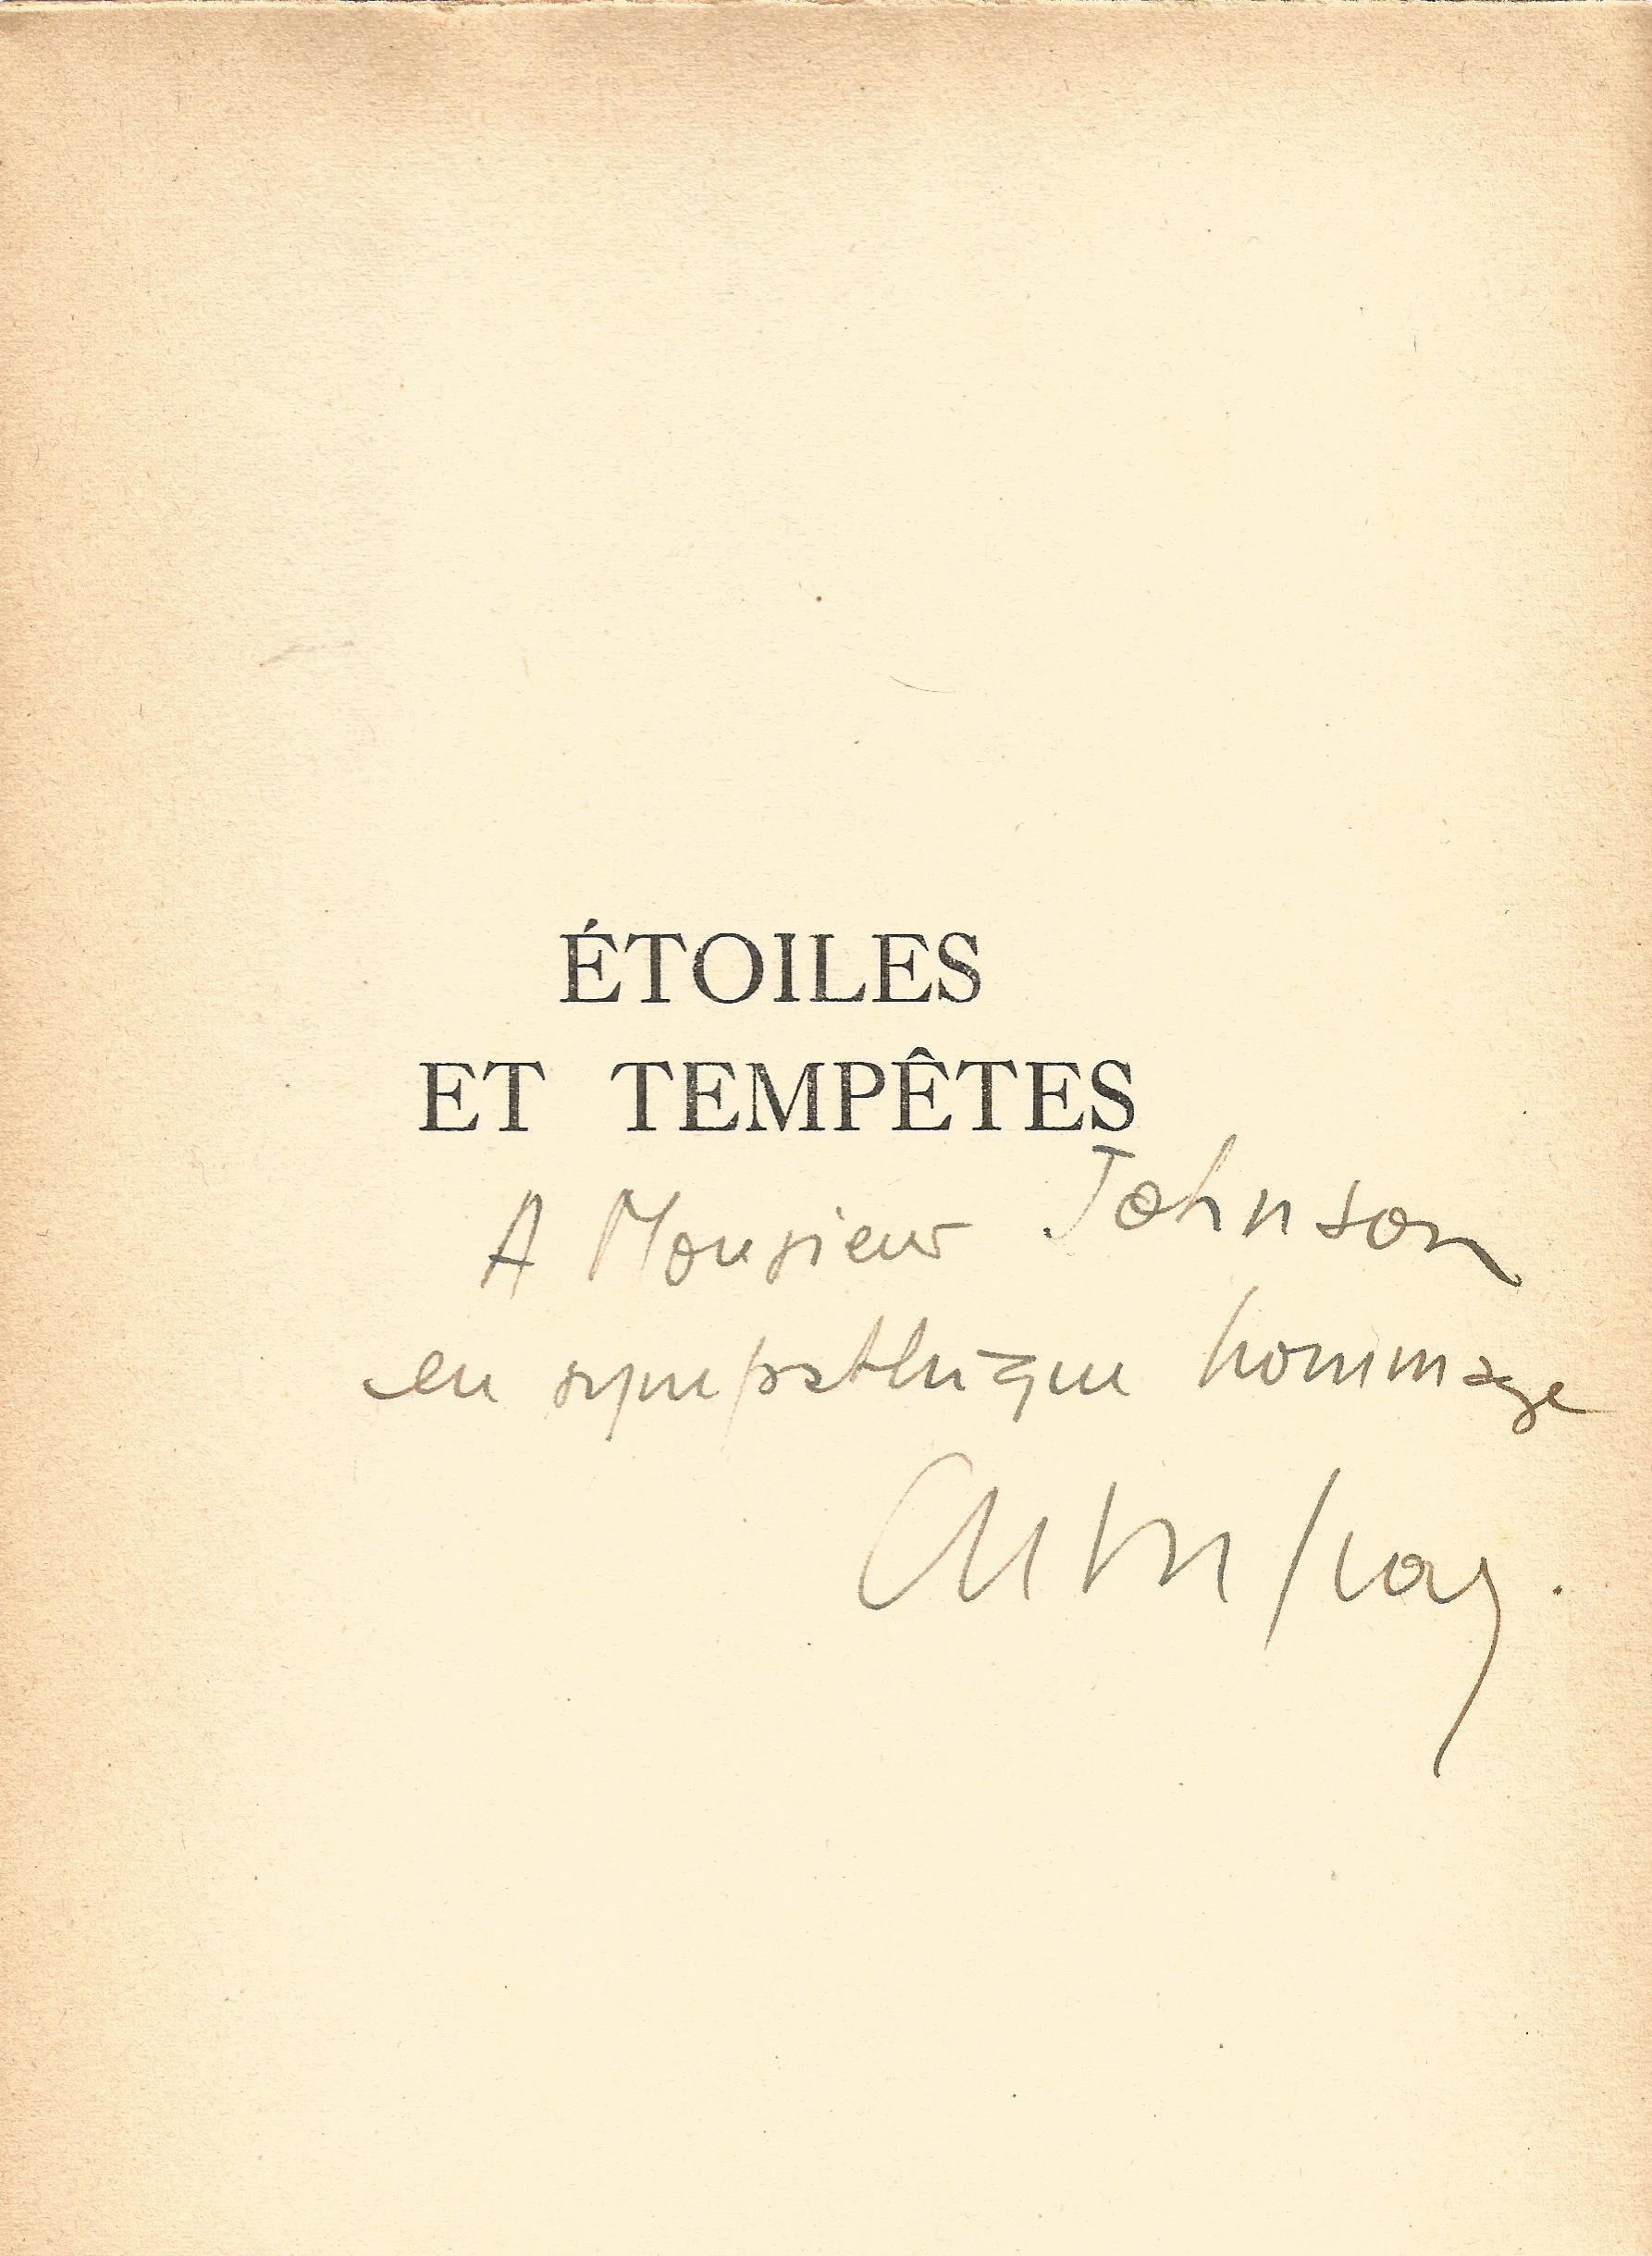 Etoiles Et Tempetes (Six Faces Nord) Gaston Rebuffat Softback Book 1954 published by B Arthaud - Image 4 of 4